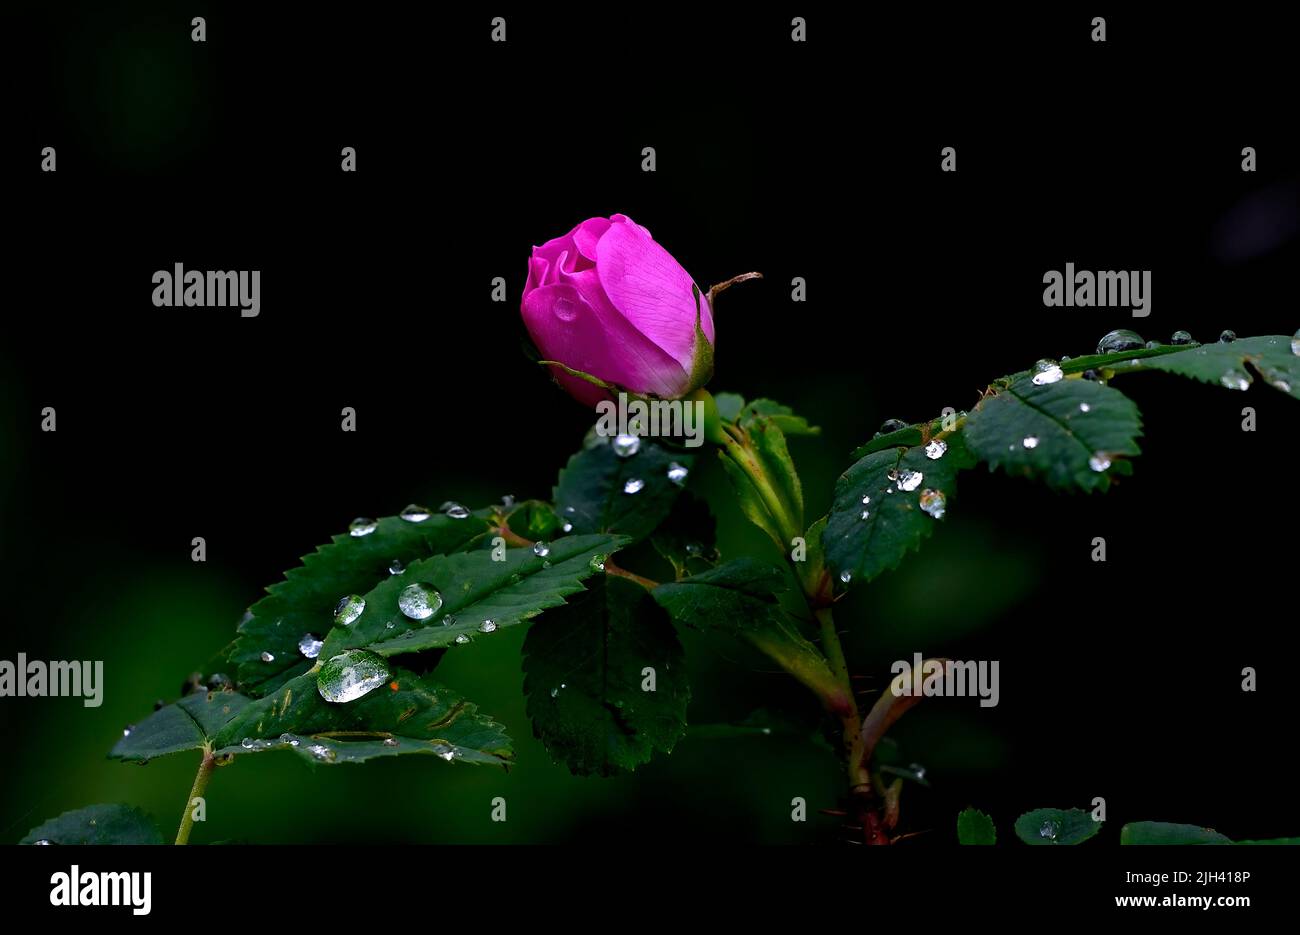 A wild rose bud (Rosa acicularis); on a dark background in the spring season in rural Alberta Canada Stock Photo